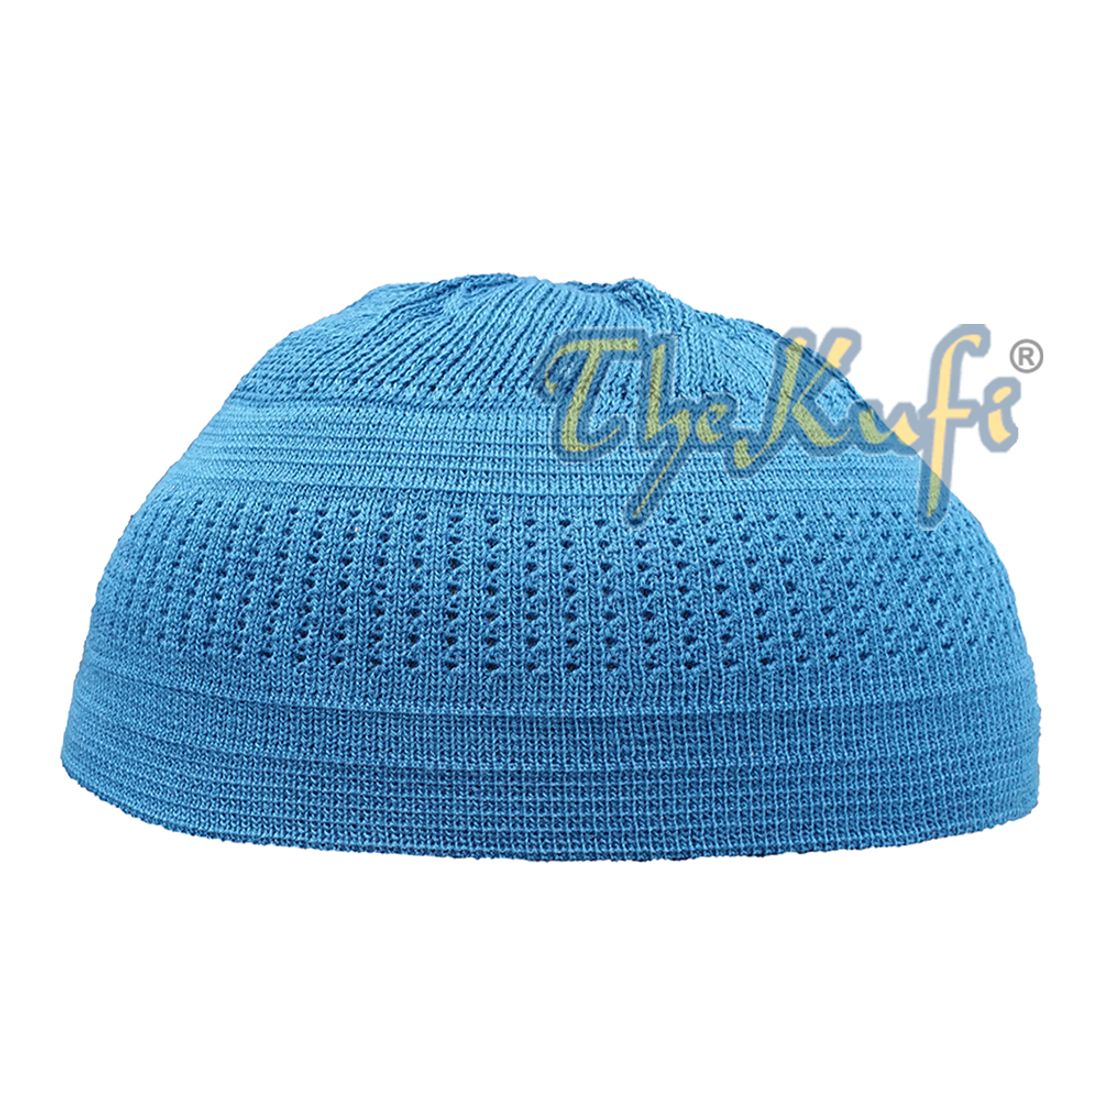 Extra Thin Teal Blue Cotton Stretch-knit Kufi